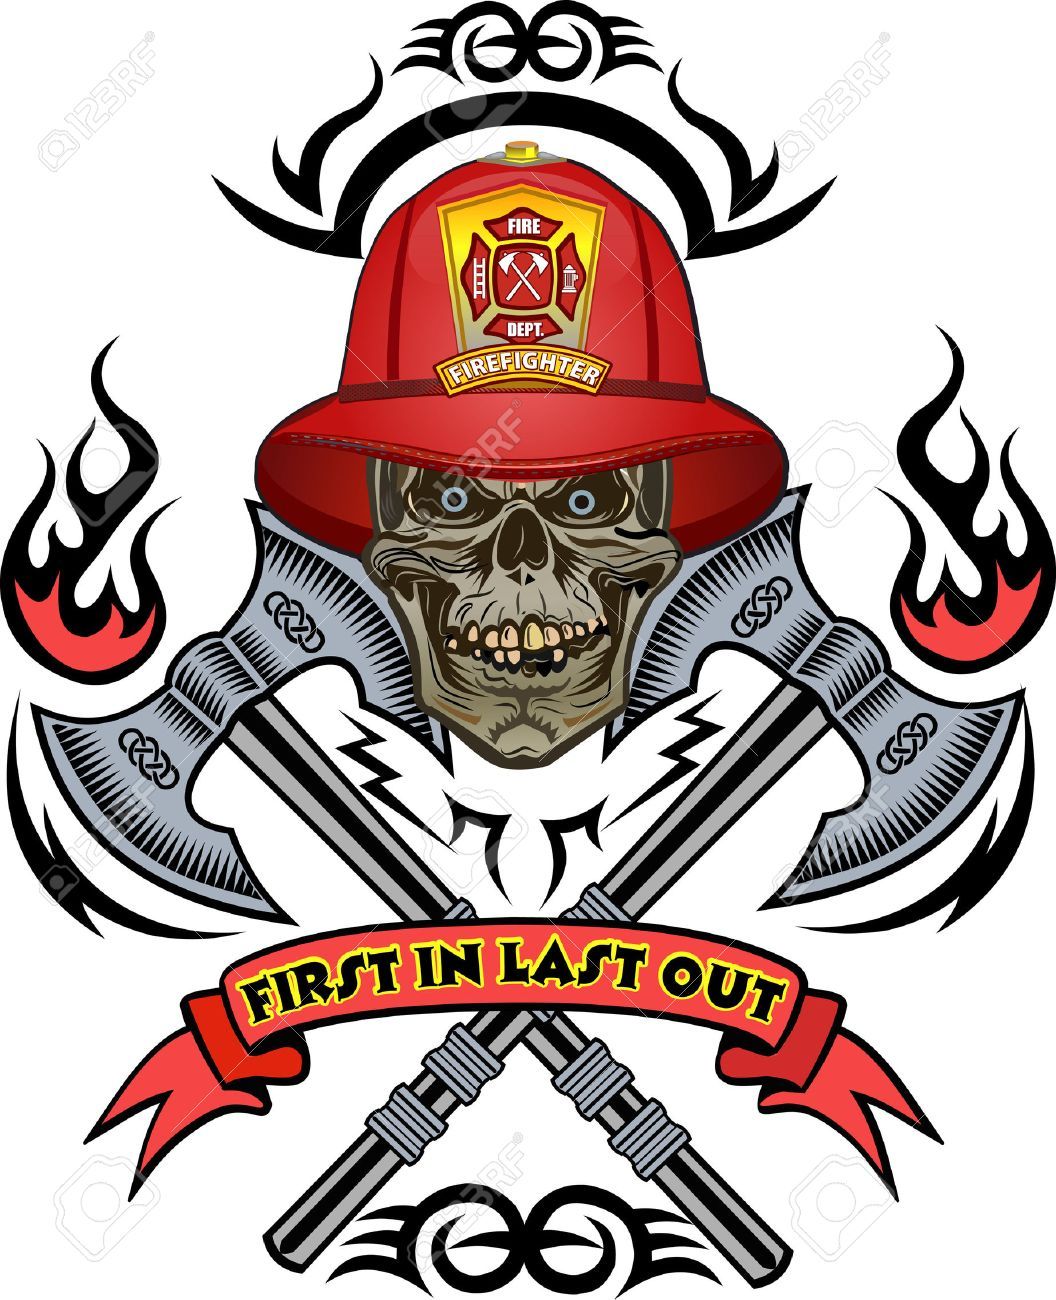 firefighter-vector-at-vectorified-collection-of-firefighter